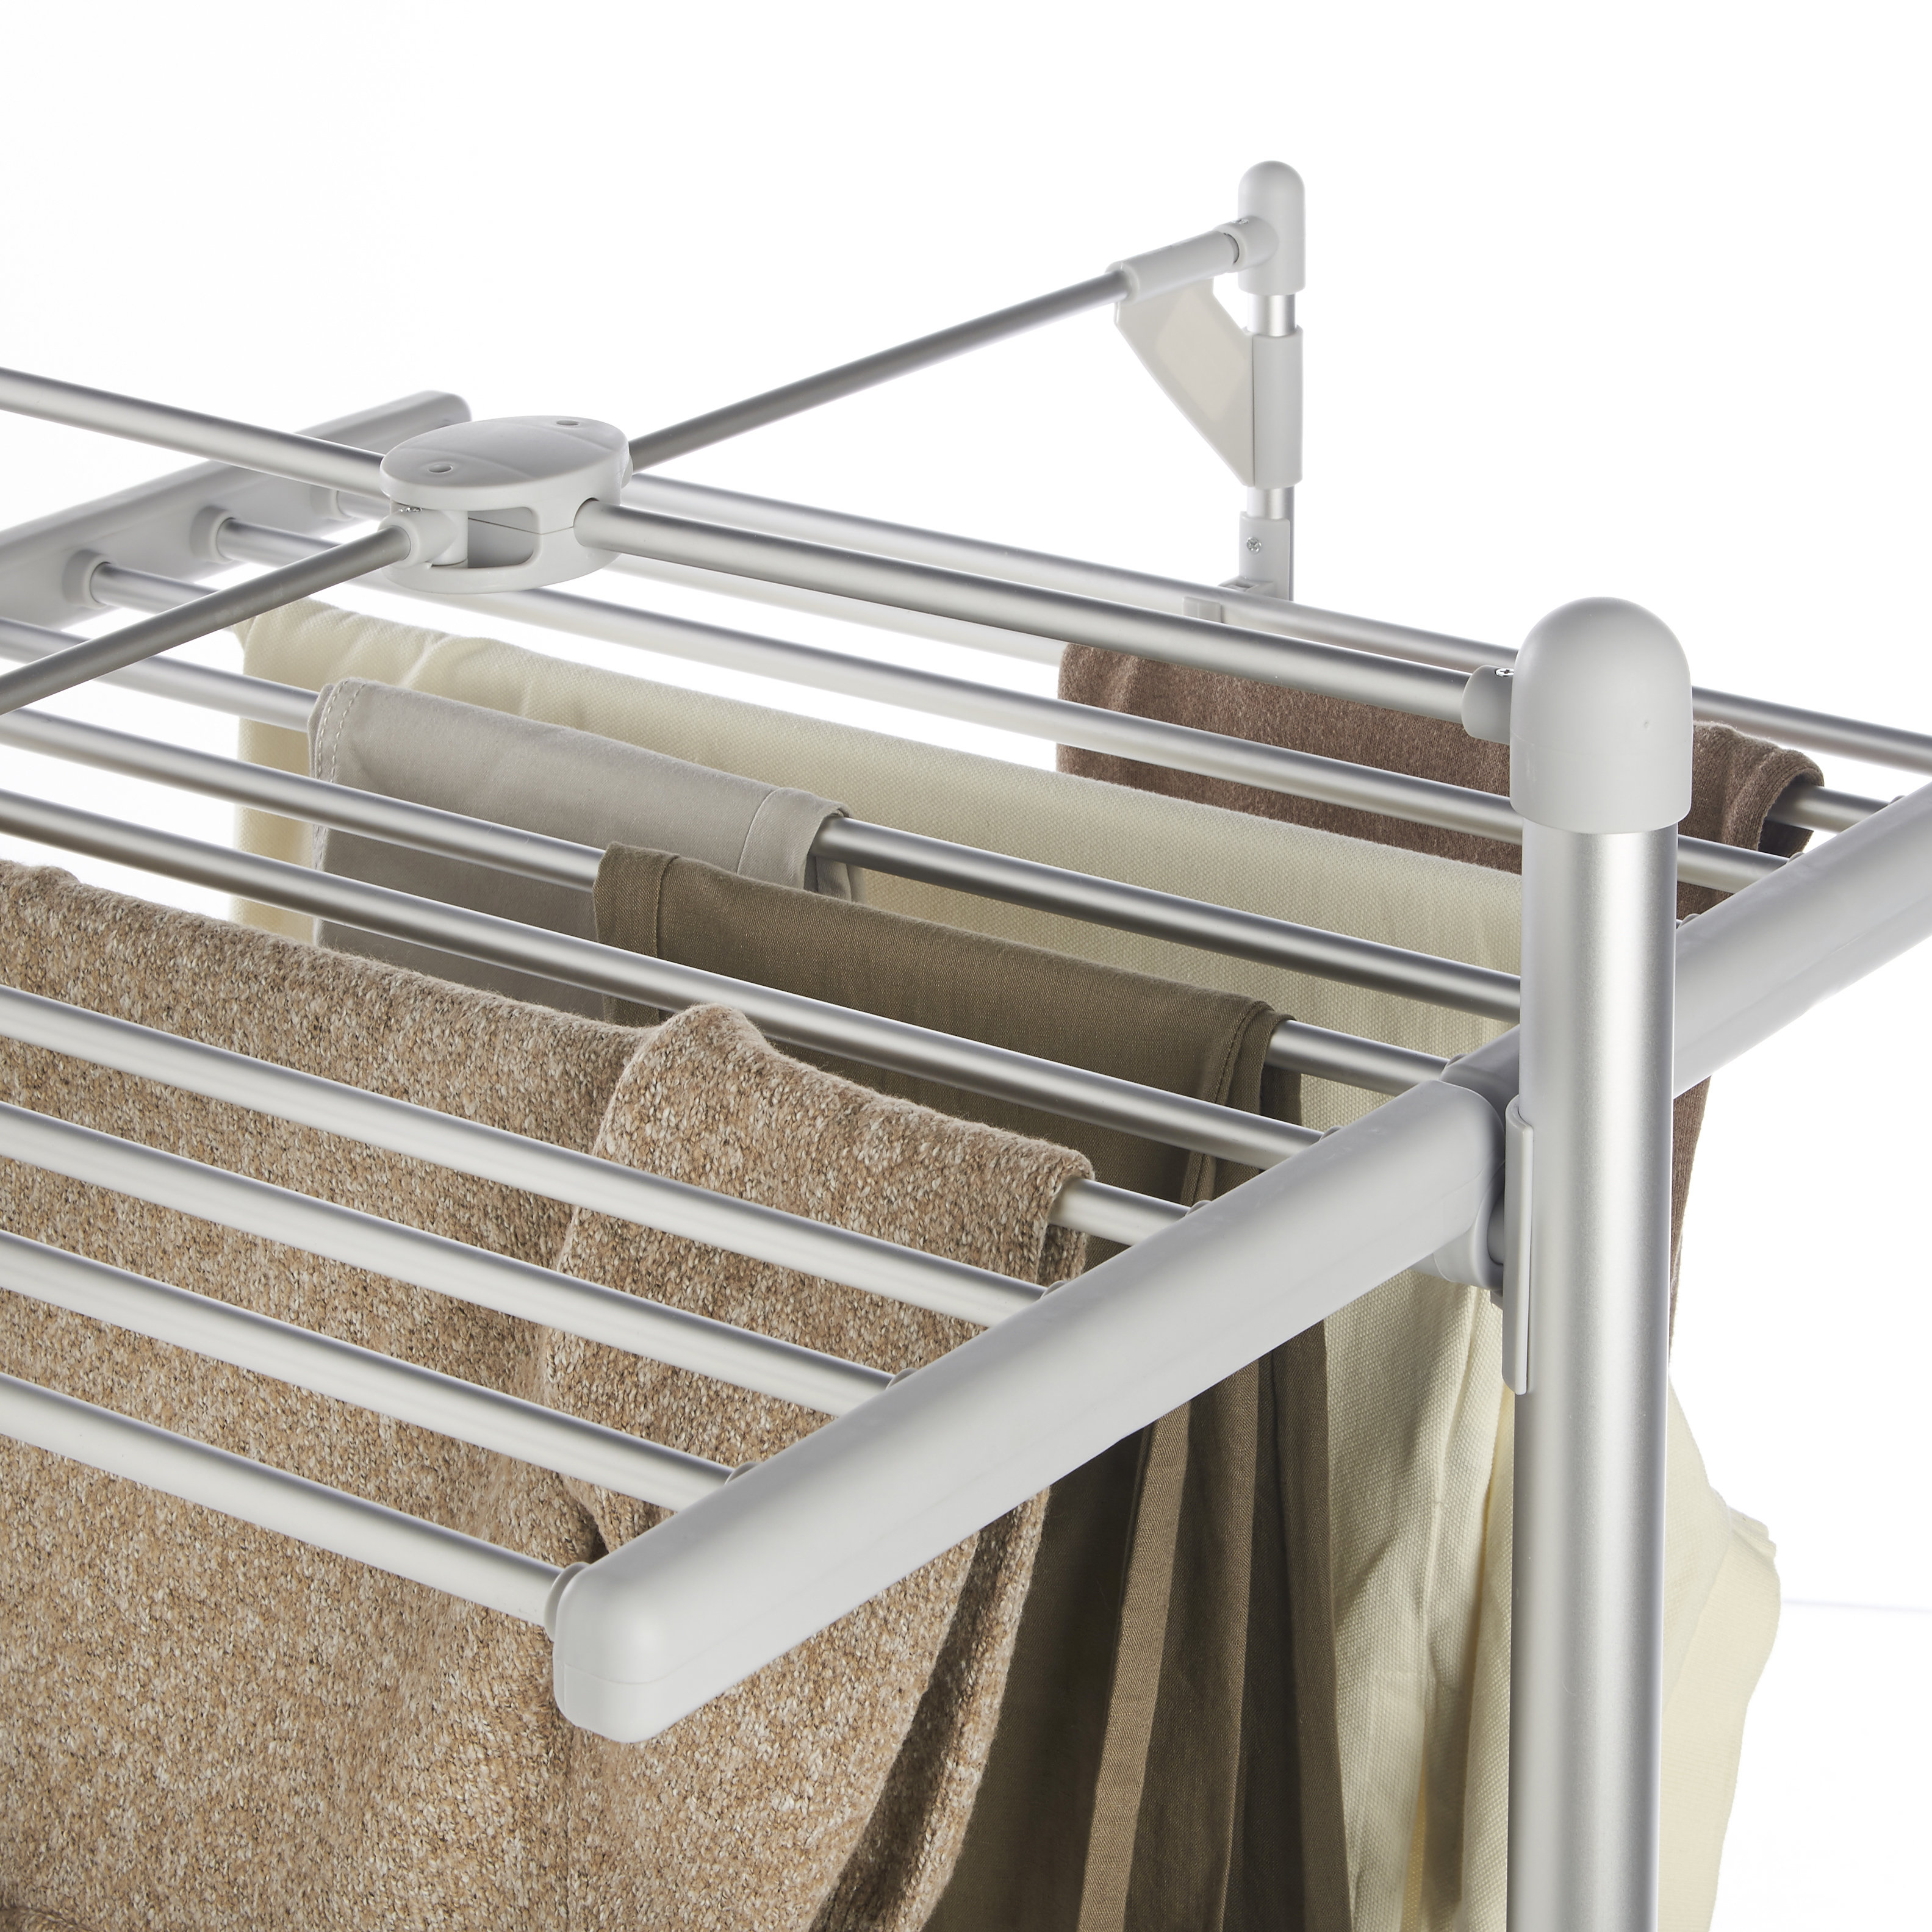  Electric Clothes Airer Dryer Rack heated drying rack for  clothes heated drying rack Household folding portable electric heating  drying rack constant temperature baby landing clothes drying airfoil : Home  & Kitchen